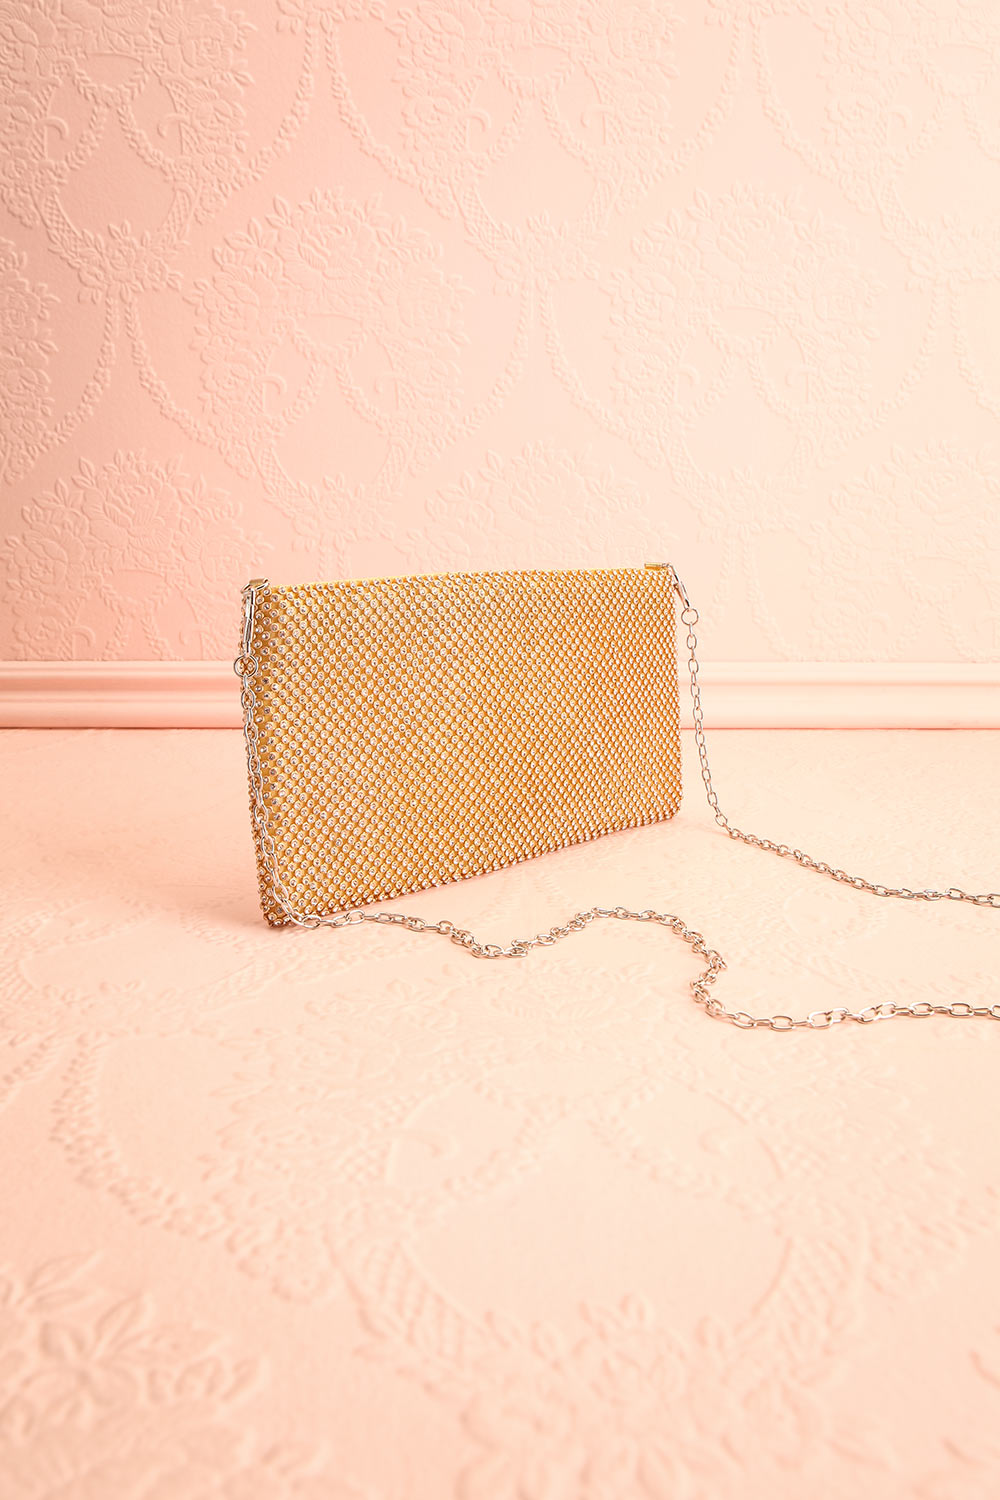 Agave Gold Crystal Clutch | Sac à Main | Boutique 1861 side view